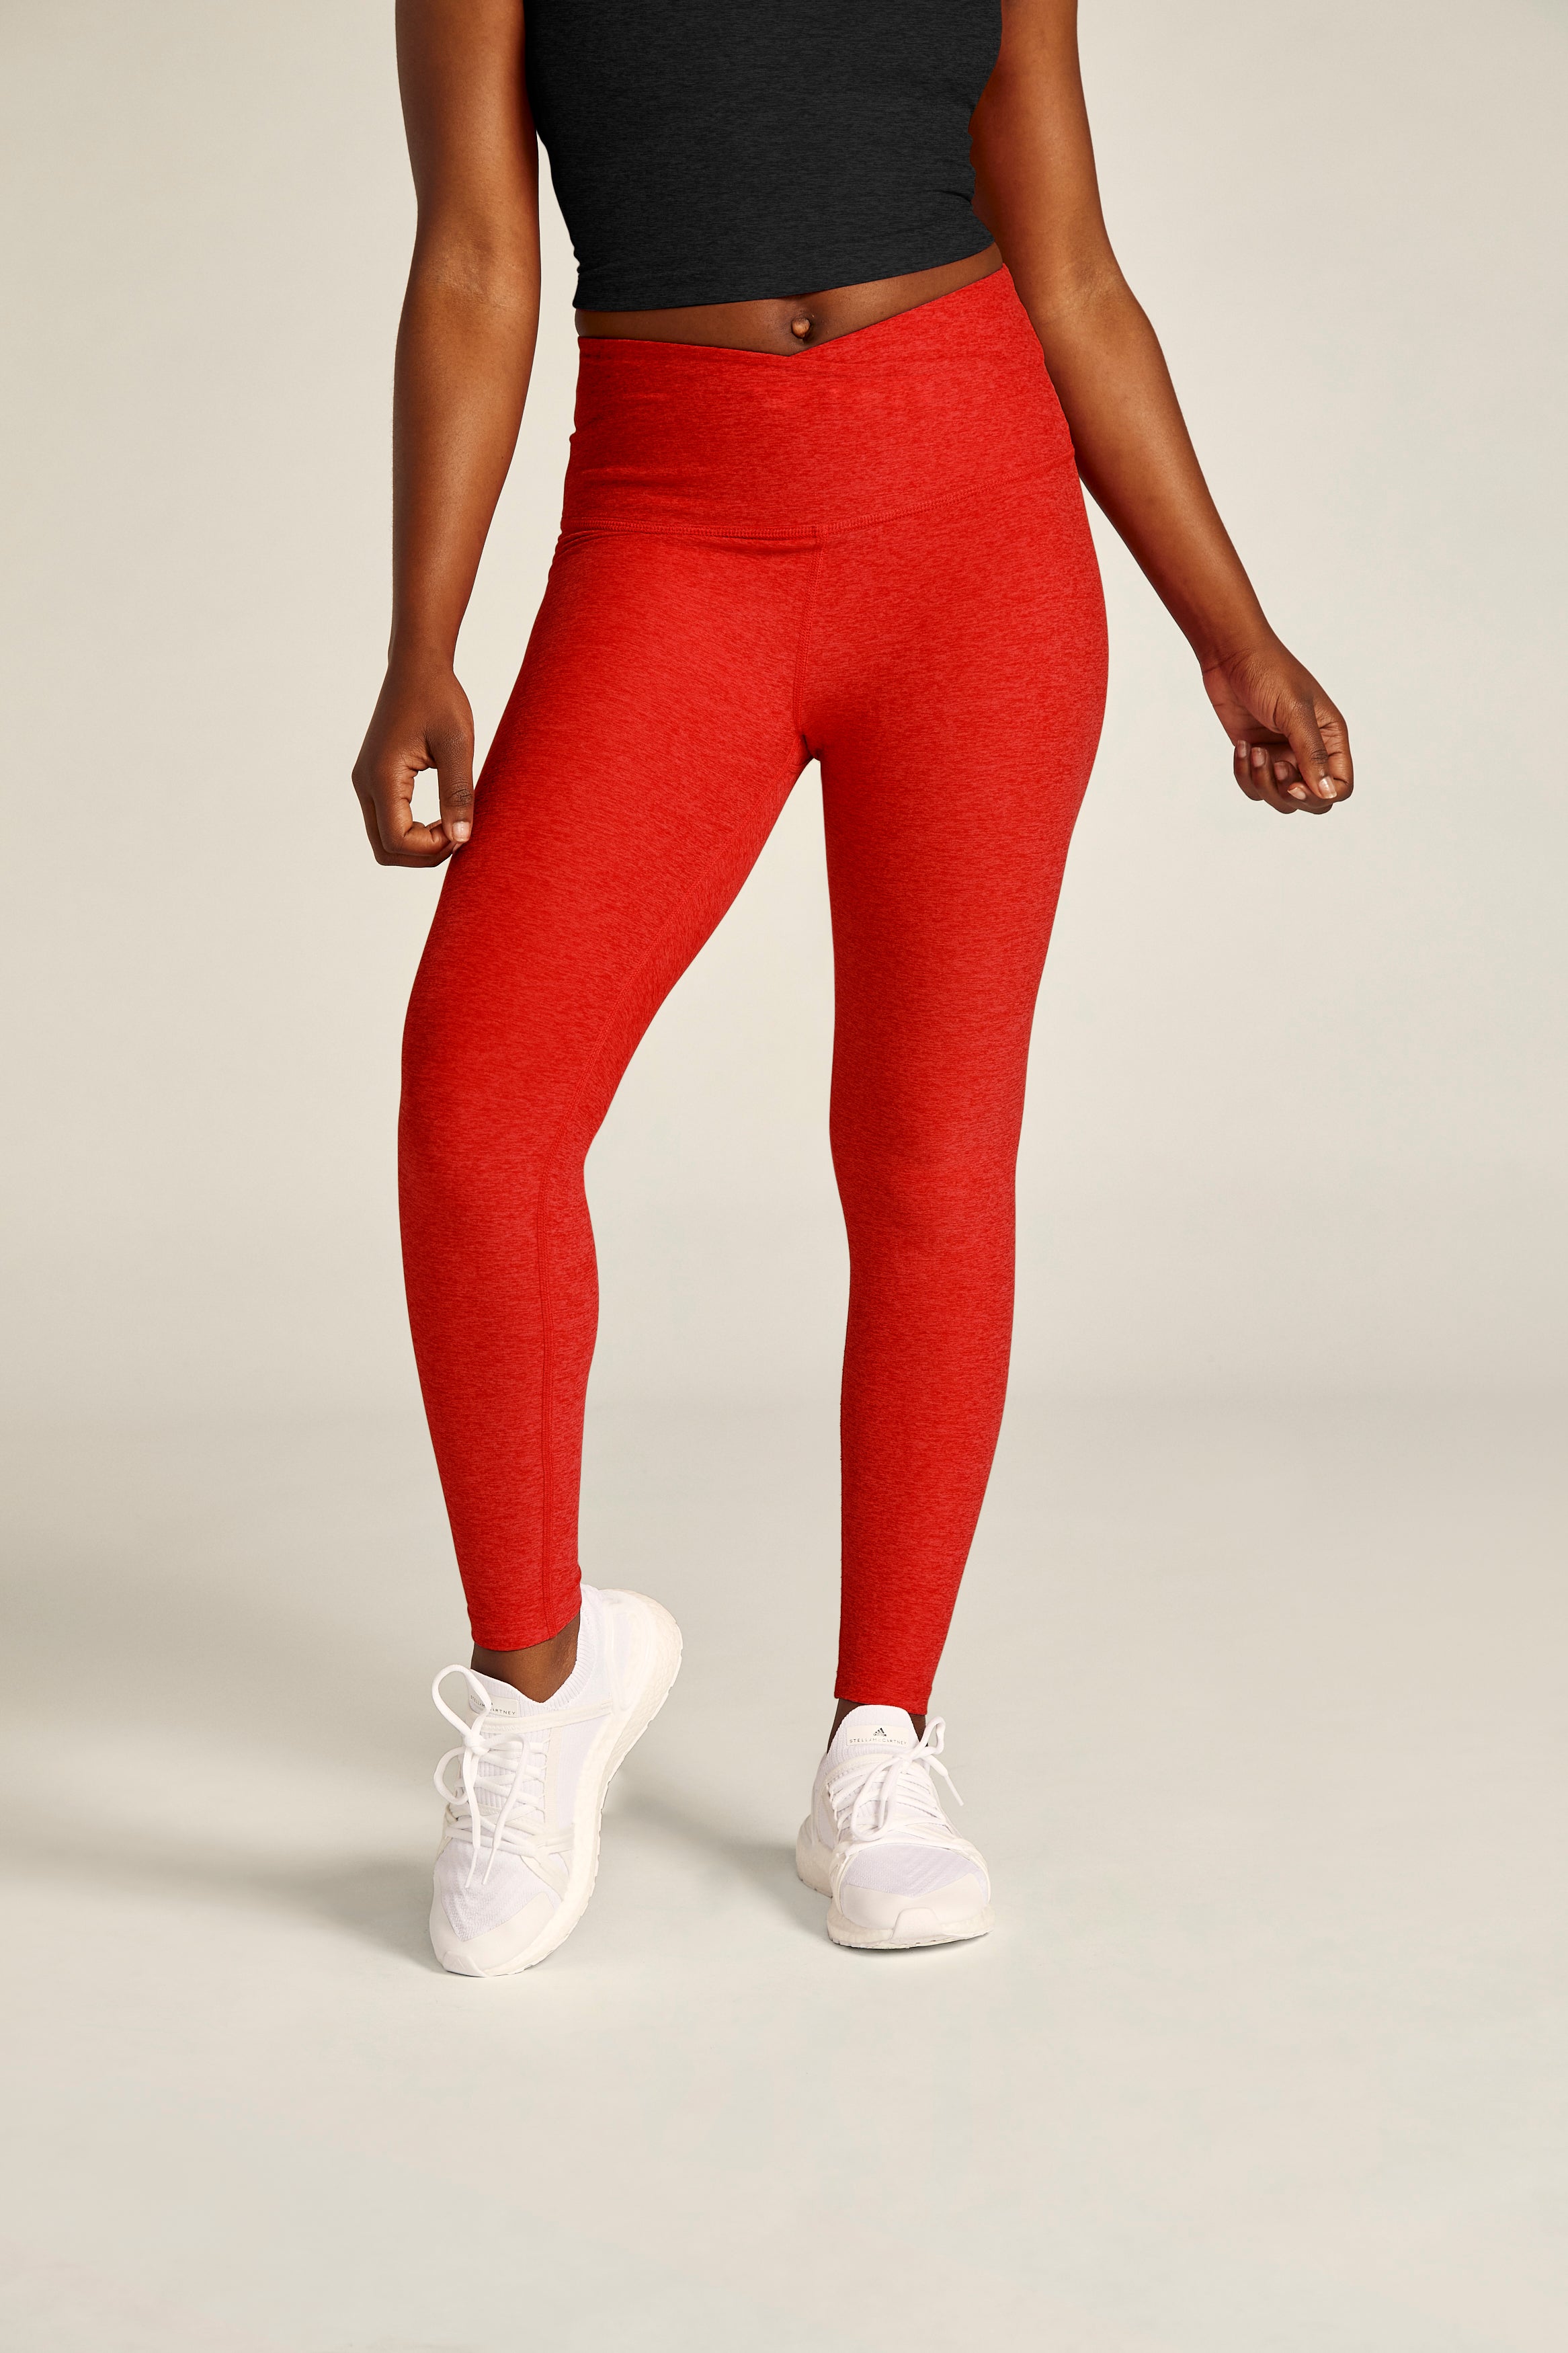 At Your Leisure High-Waisted Midi Legging